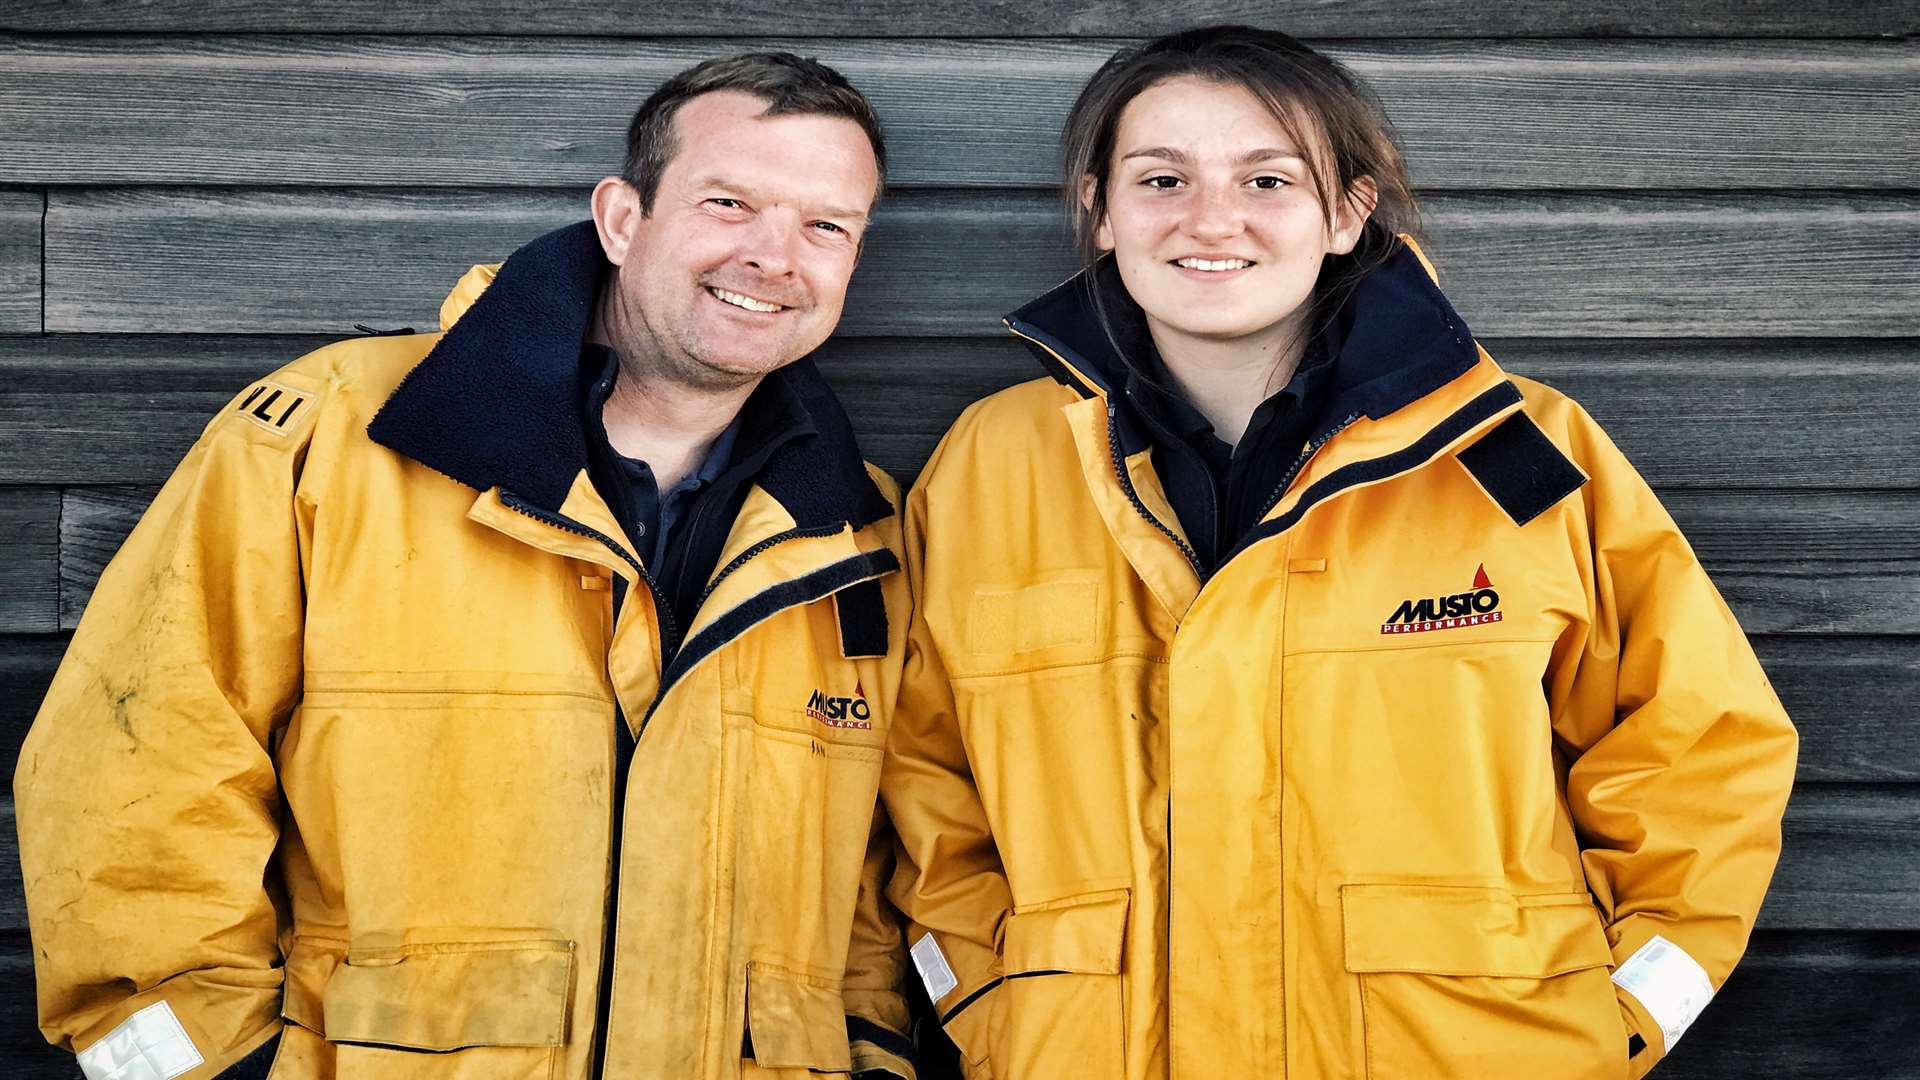 Ian and Becky Cannon at Ramsgate RNLI. Pic: RNLI/ Jack Lowe